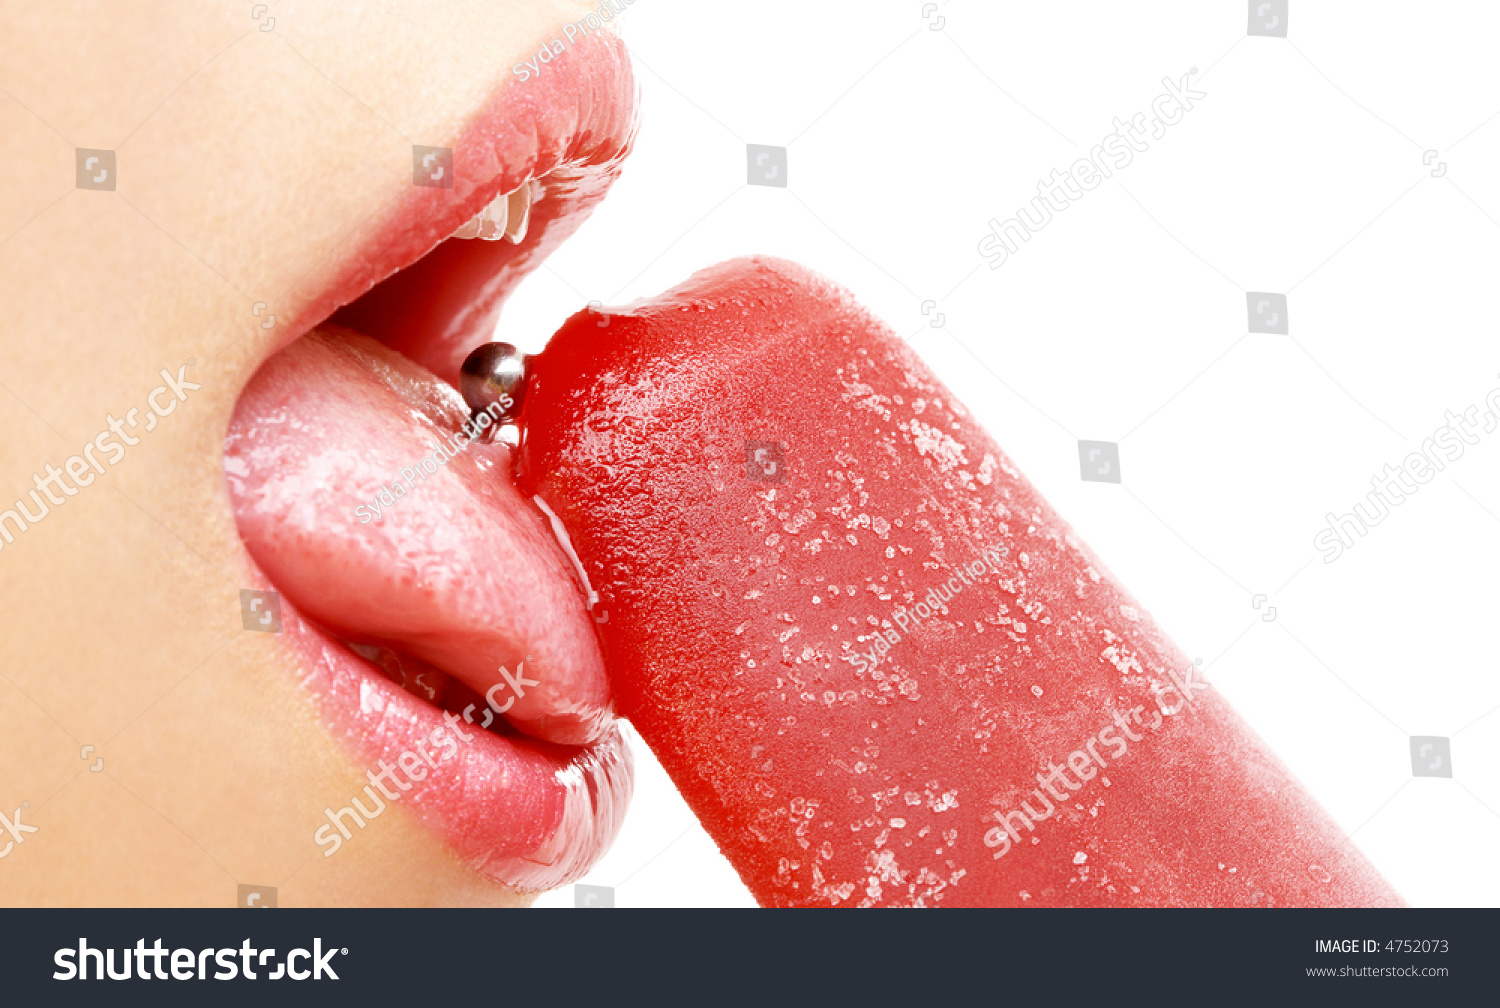 stock-photo-picture-of-ice-cream-lips-an